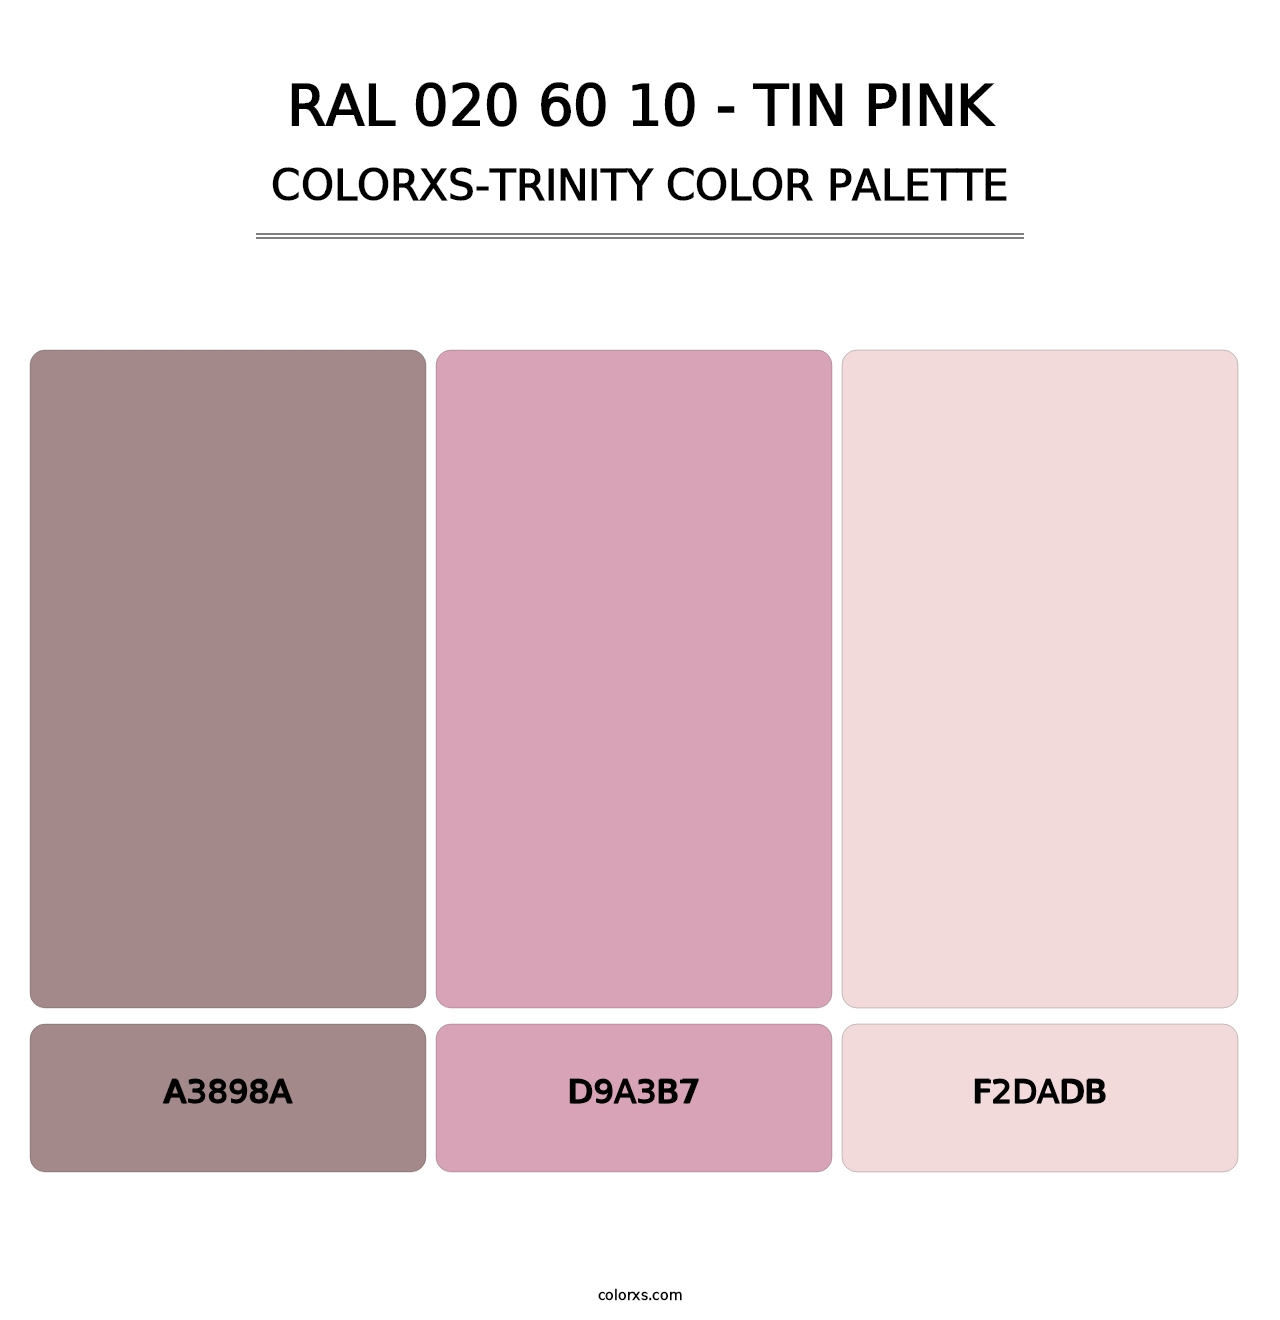 RAL 020 60 10 - Tin Pink - Colorxs Trinity Palette